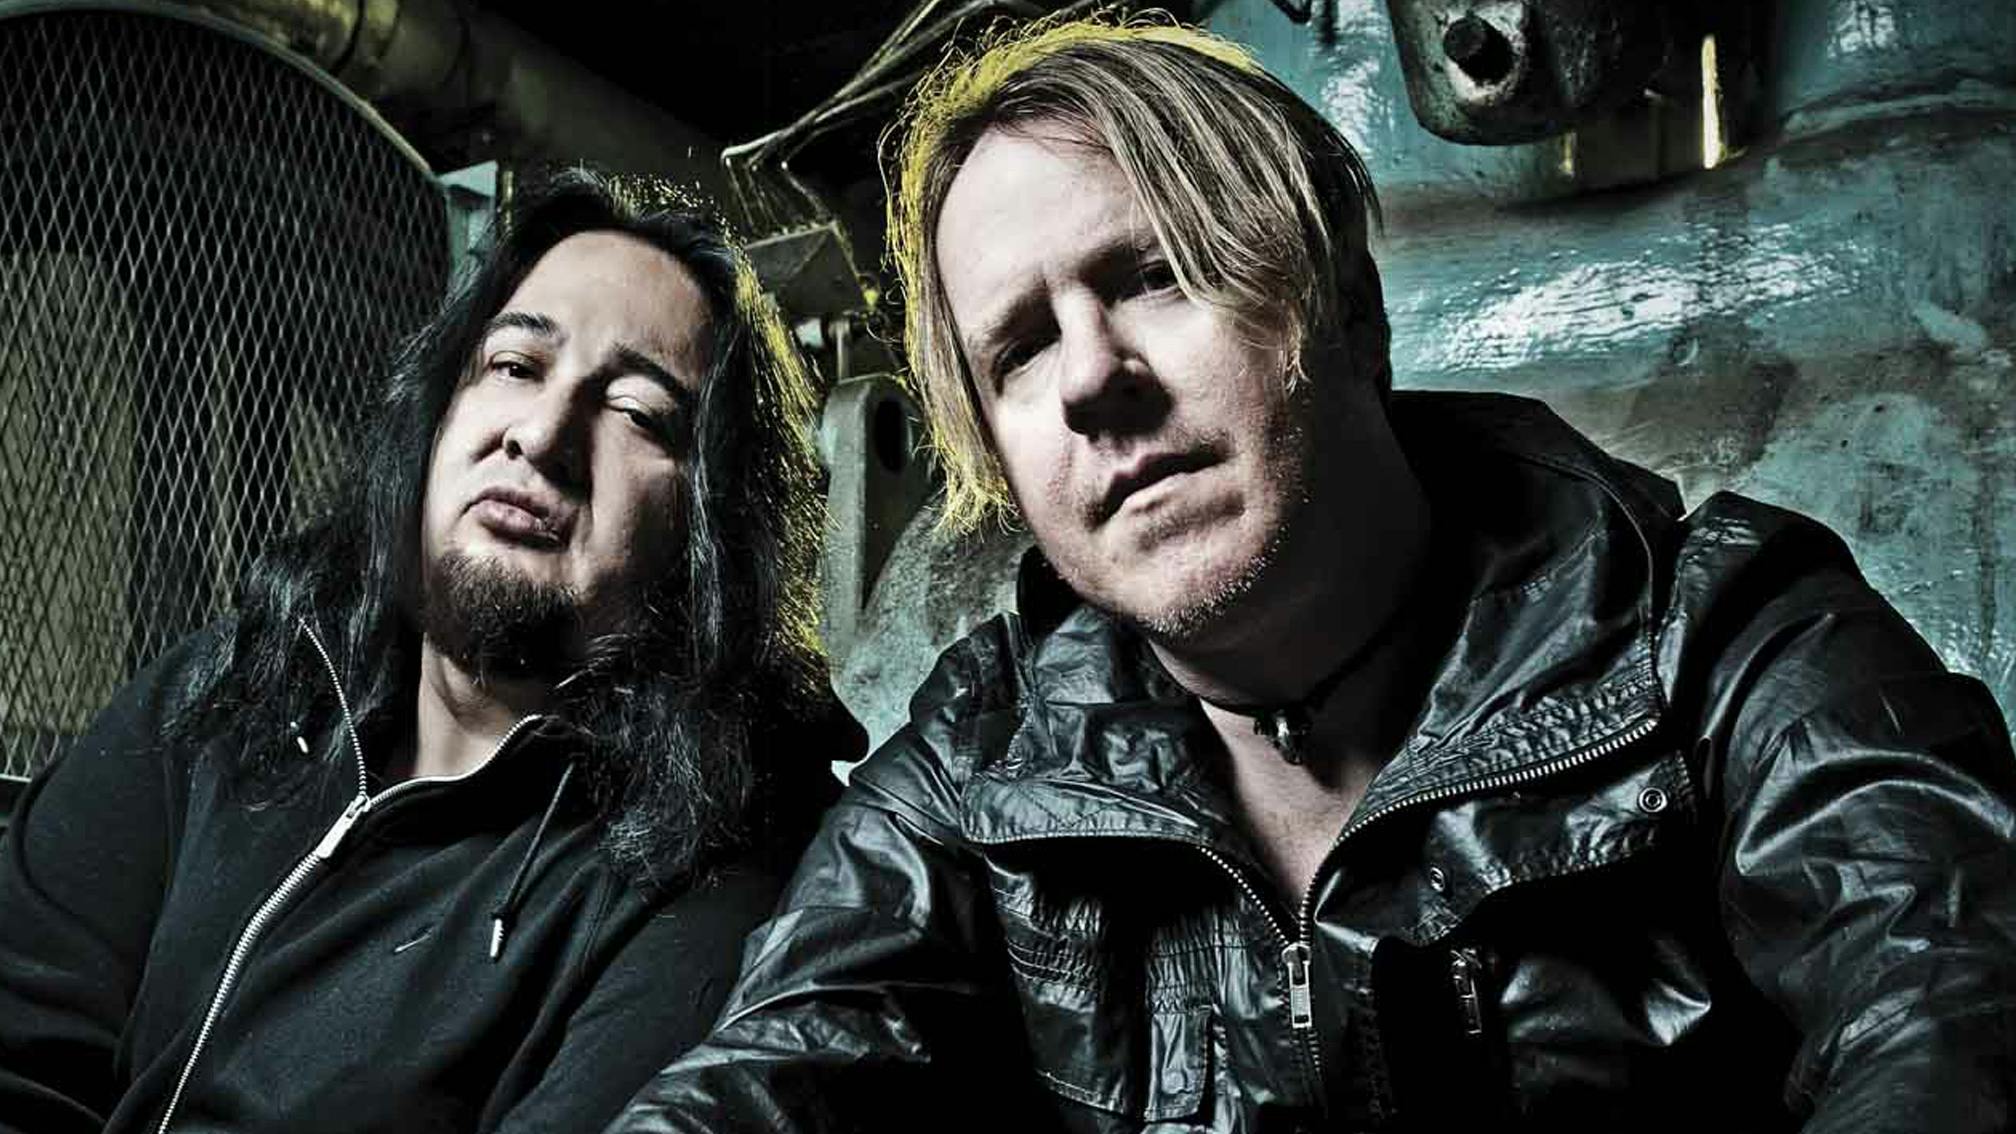 Burton C. Bell Leaves Fear Factory: "I Cannot Align Myself With Someone Whom I Do Not Trust, Nor Respect"